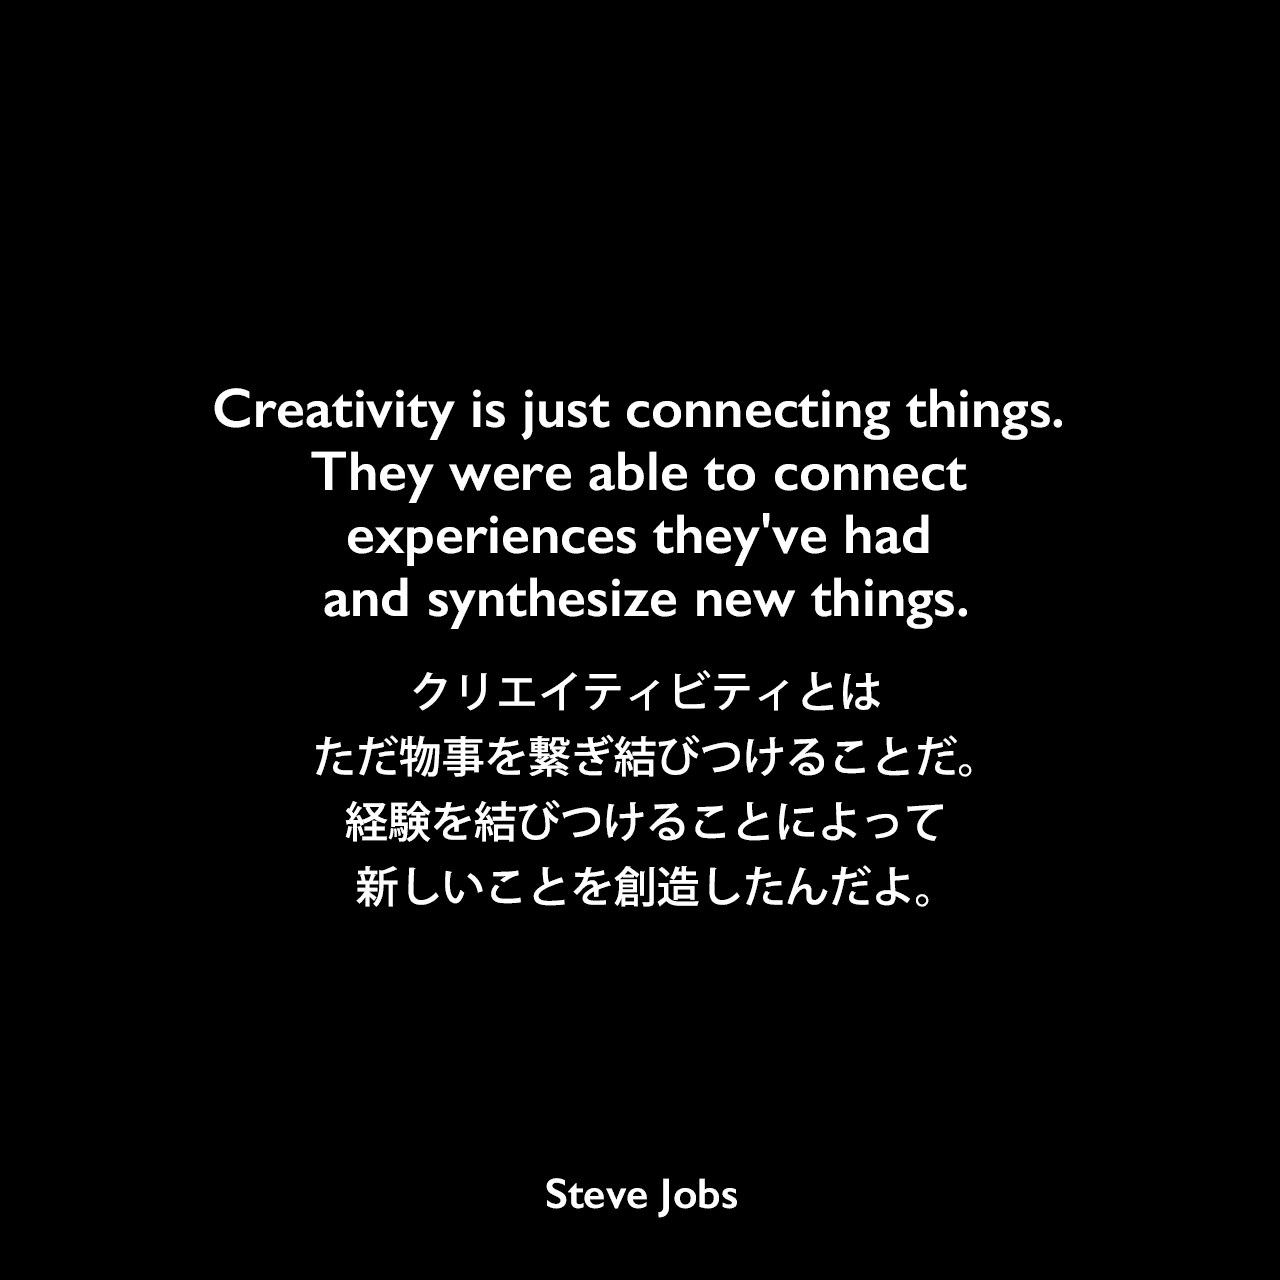 Creativity is just connecting things. They were able to connect experiences they've had and synthesize new things.クリエイティビティとは、ただ物事を繋ぎ結びつけることだ。経験を結びつけることによって新しいことを創造したんだよ。- 1996年2月 Wired MagazineのインタビューでSteve Jobs